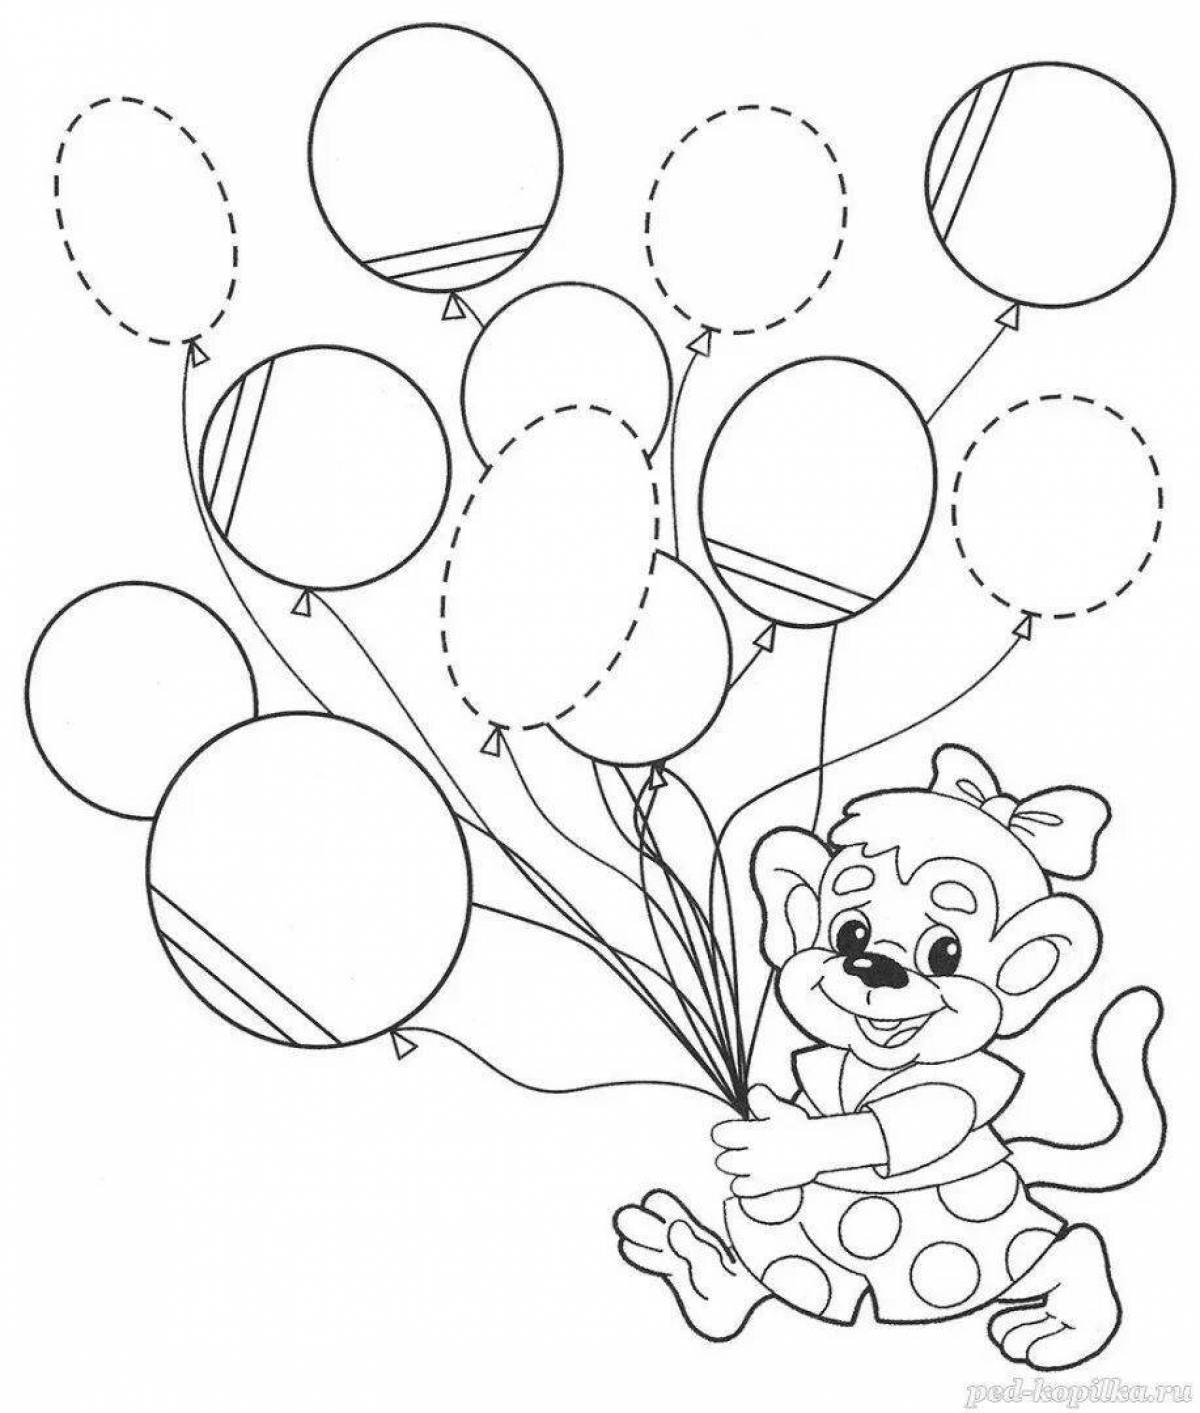 Fun coloring book with a ball for 2-3 year olds